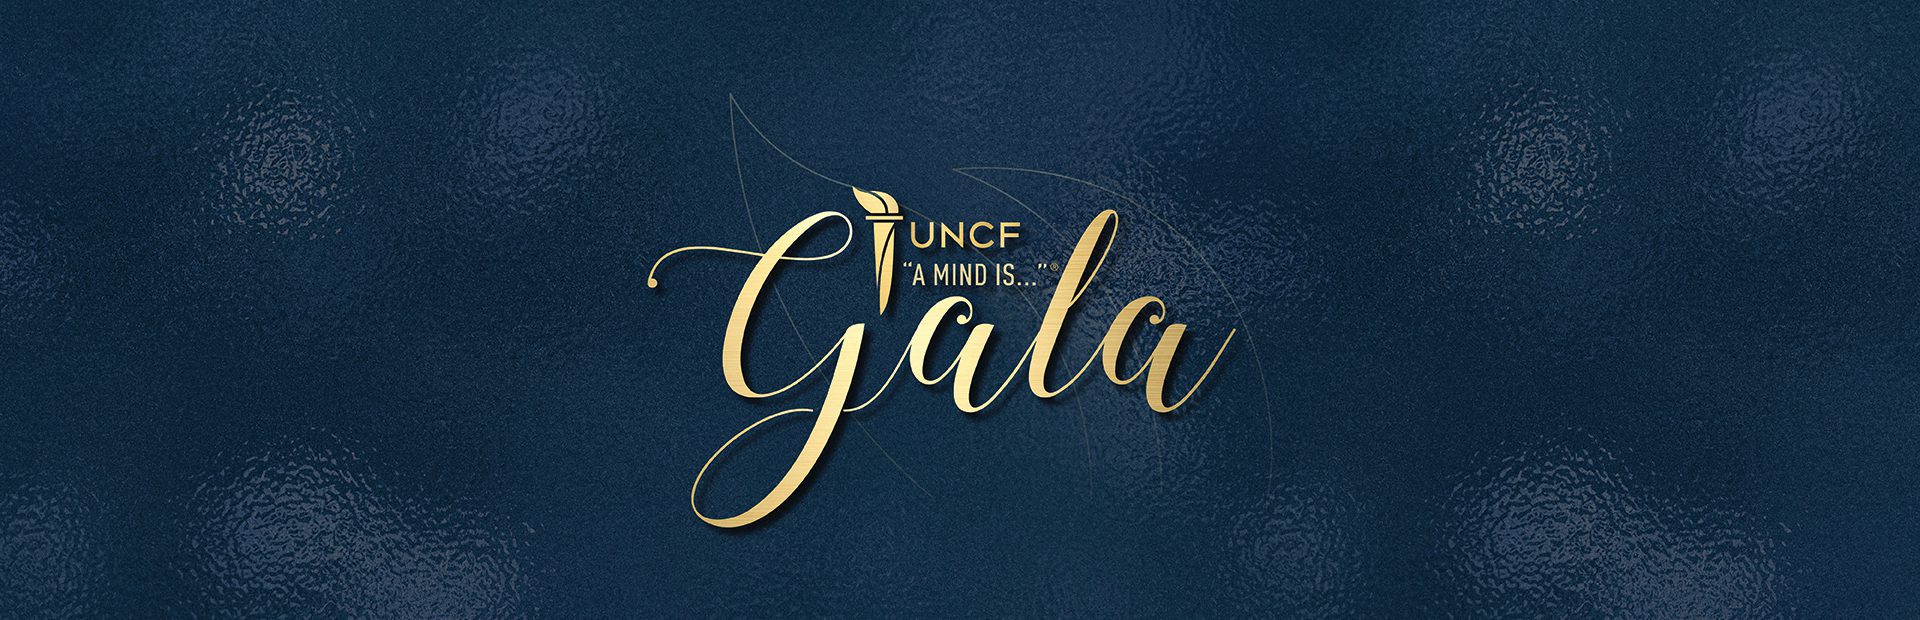 ​2022 UNCF &#8220;A Mind Is&#8230;&#8221;® Gala &#8211; Chicago